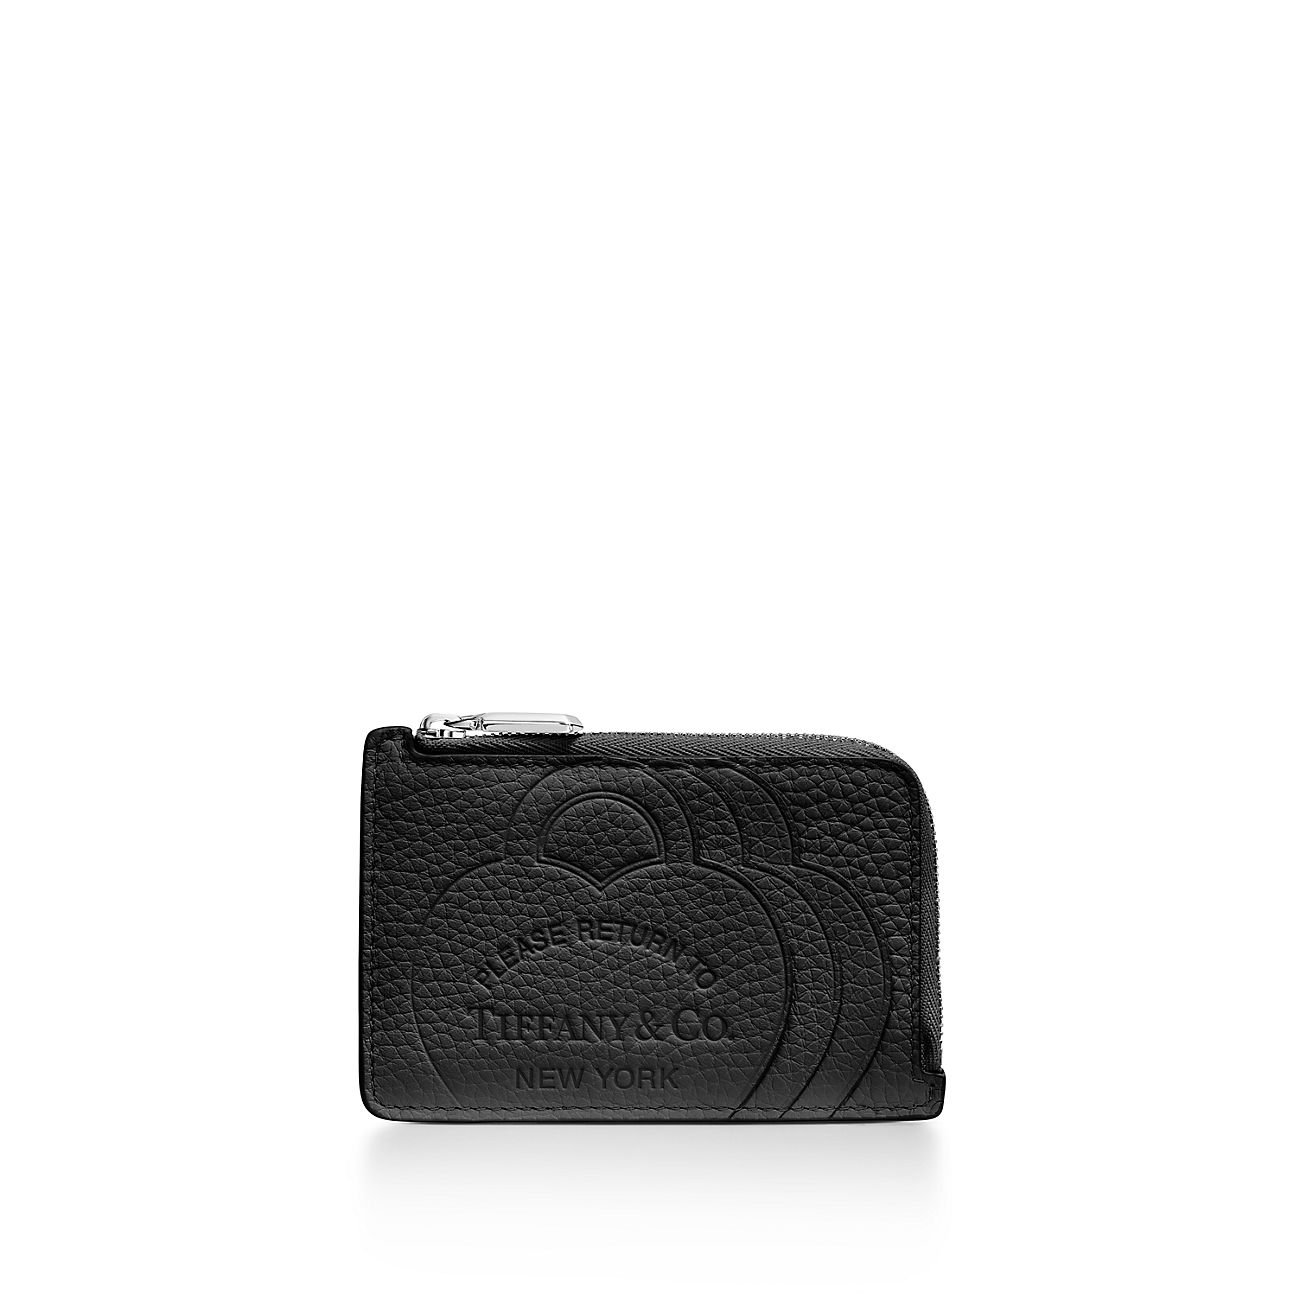 Return to Tiffany® Zip Card Case in Black Leather | Tiffany & Co.